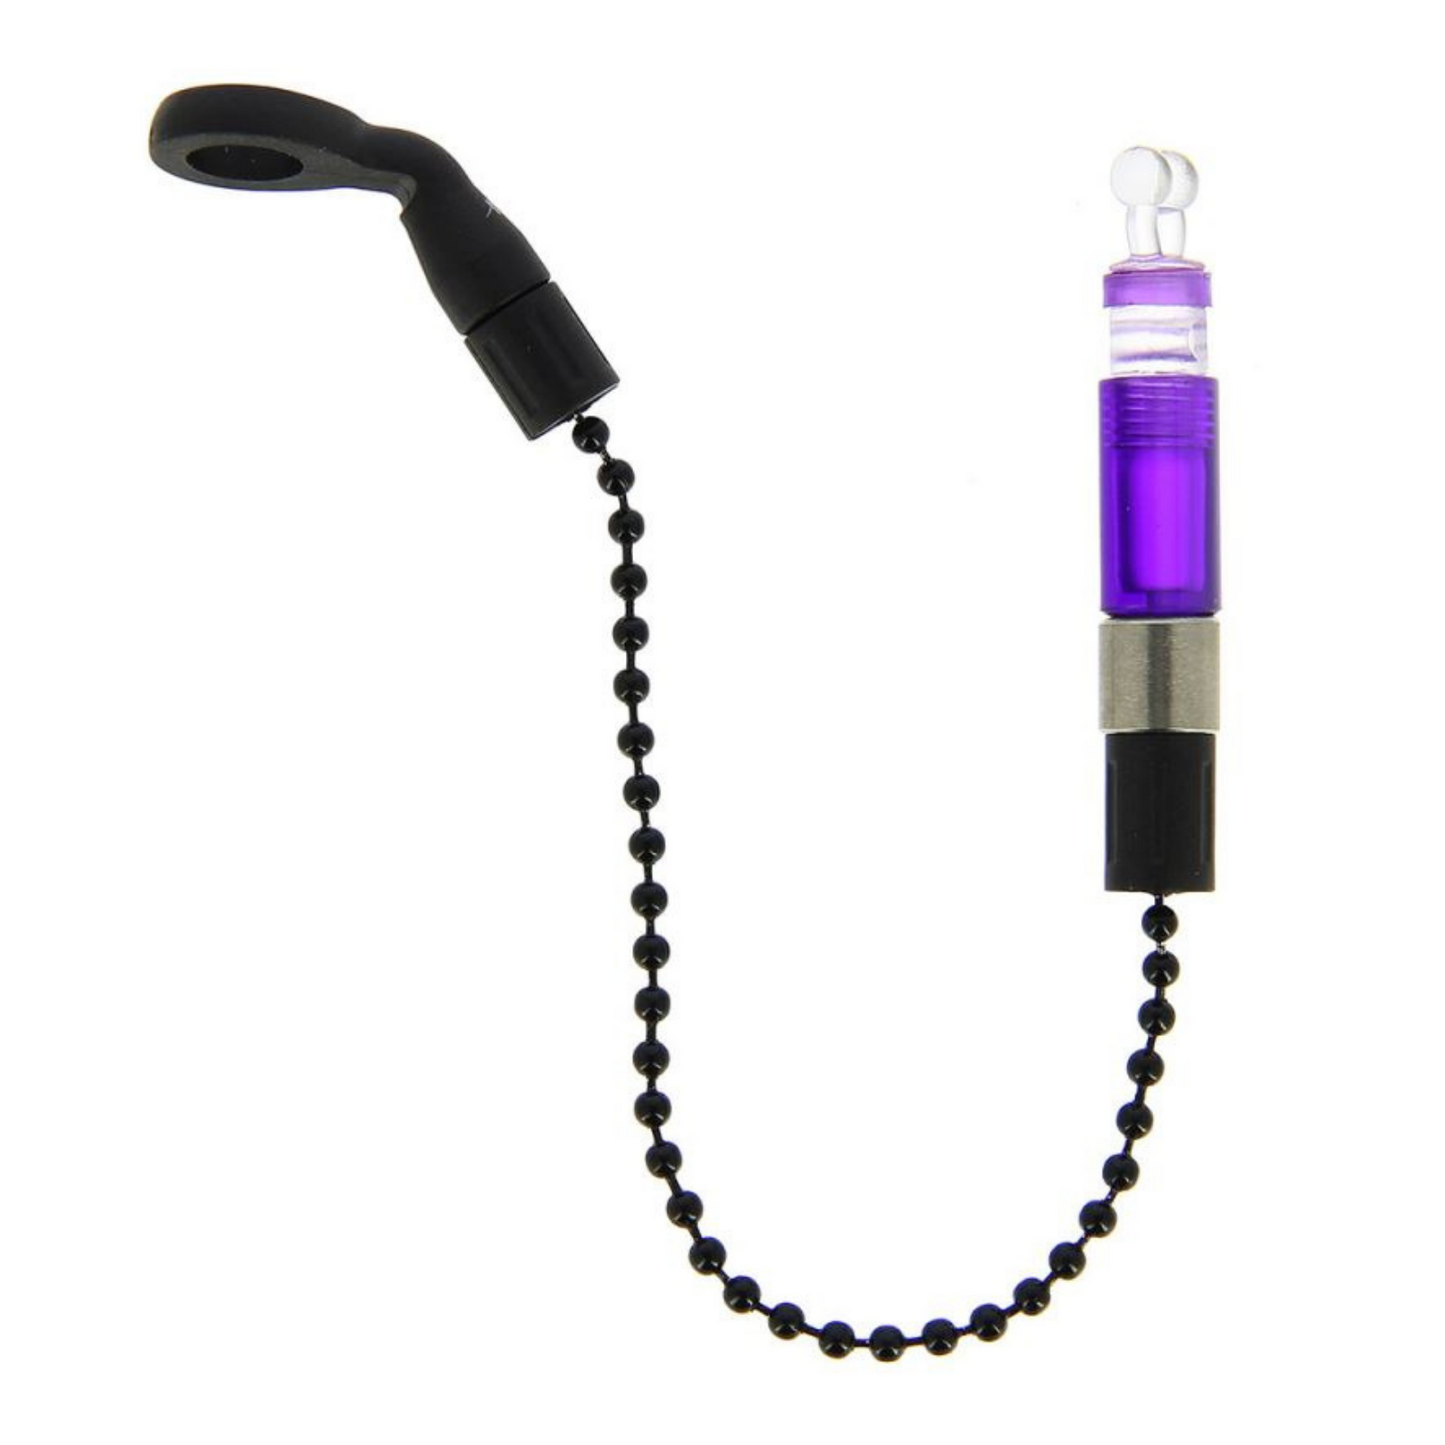 NGT Profiler Indicator - Ball Clip Head with Black Chain and Adjustable Weight.